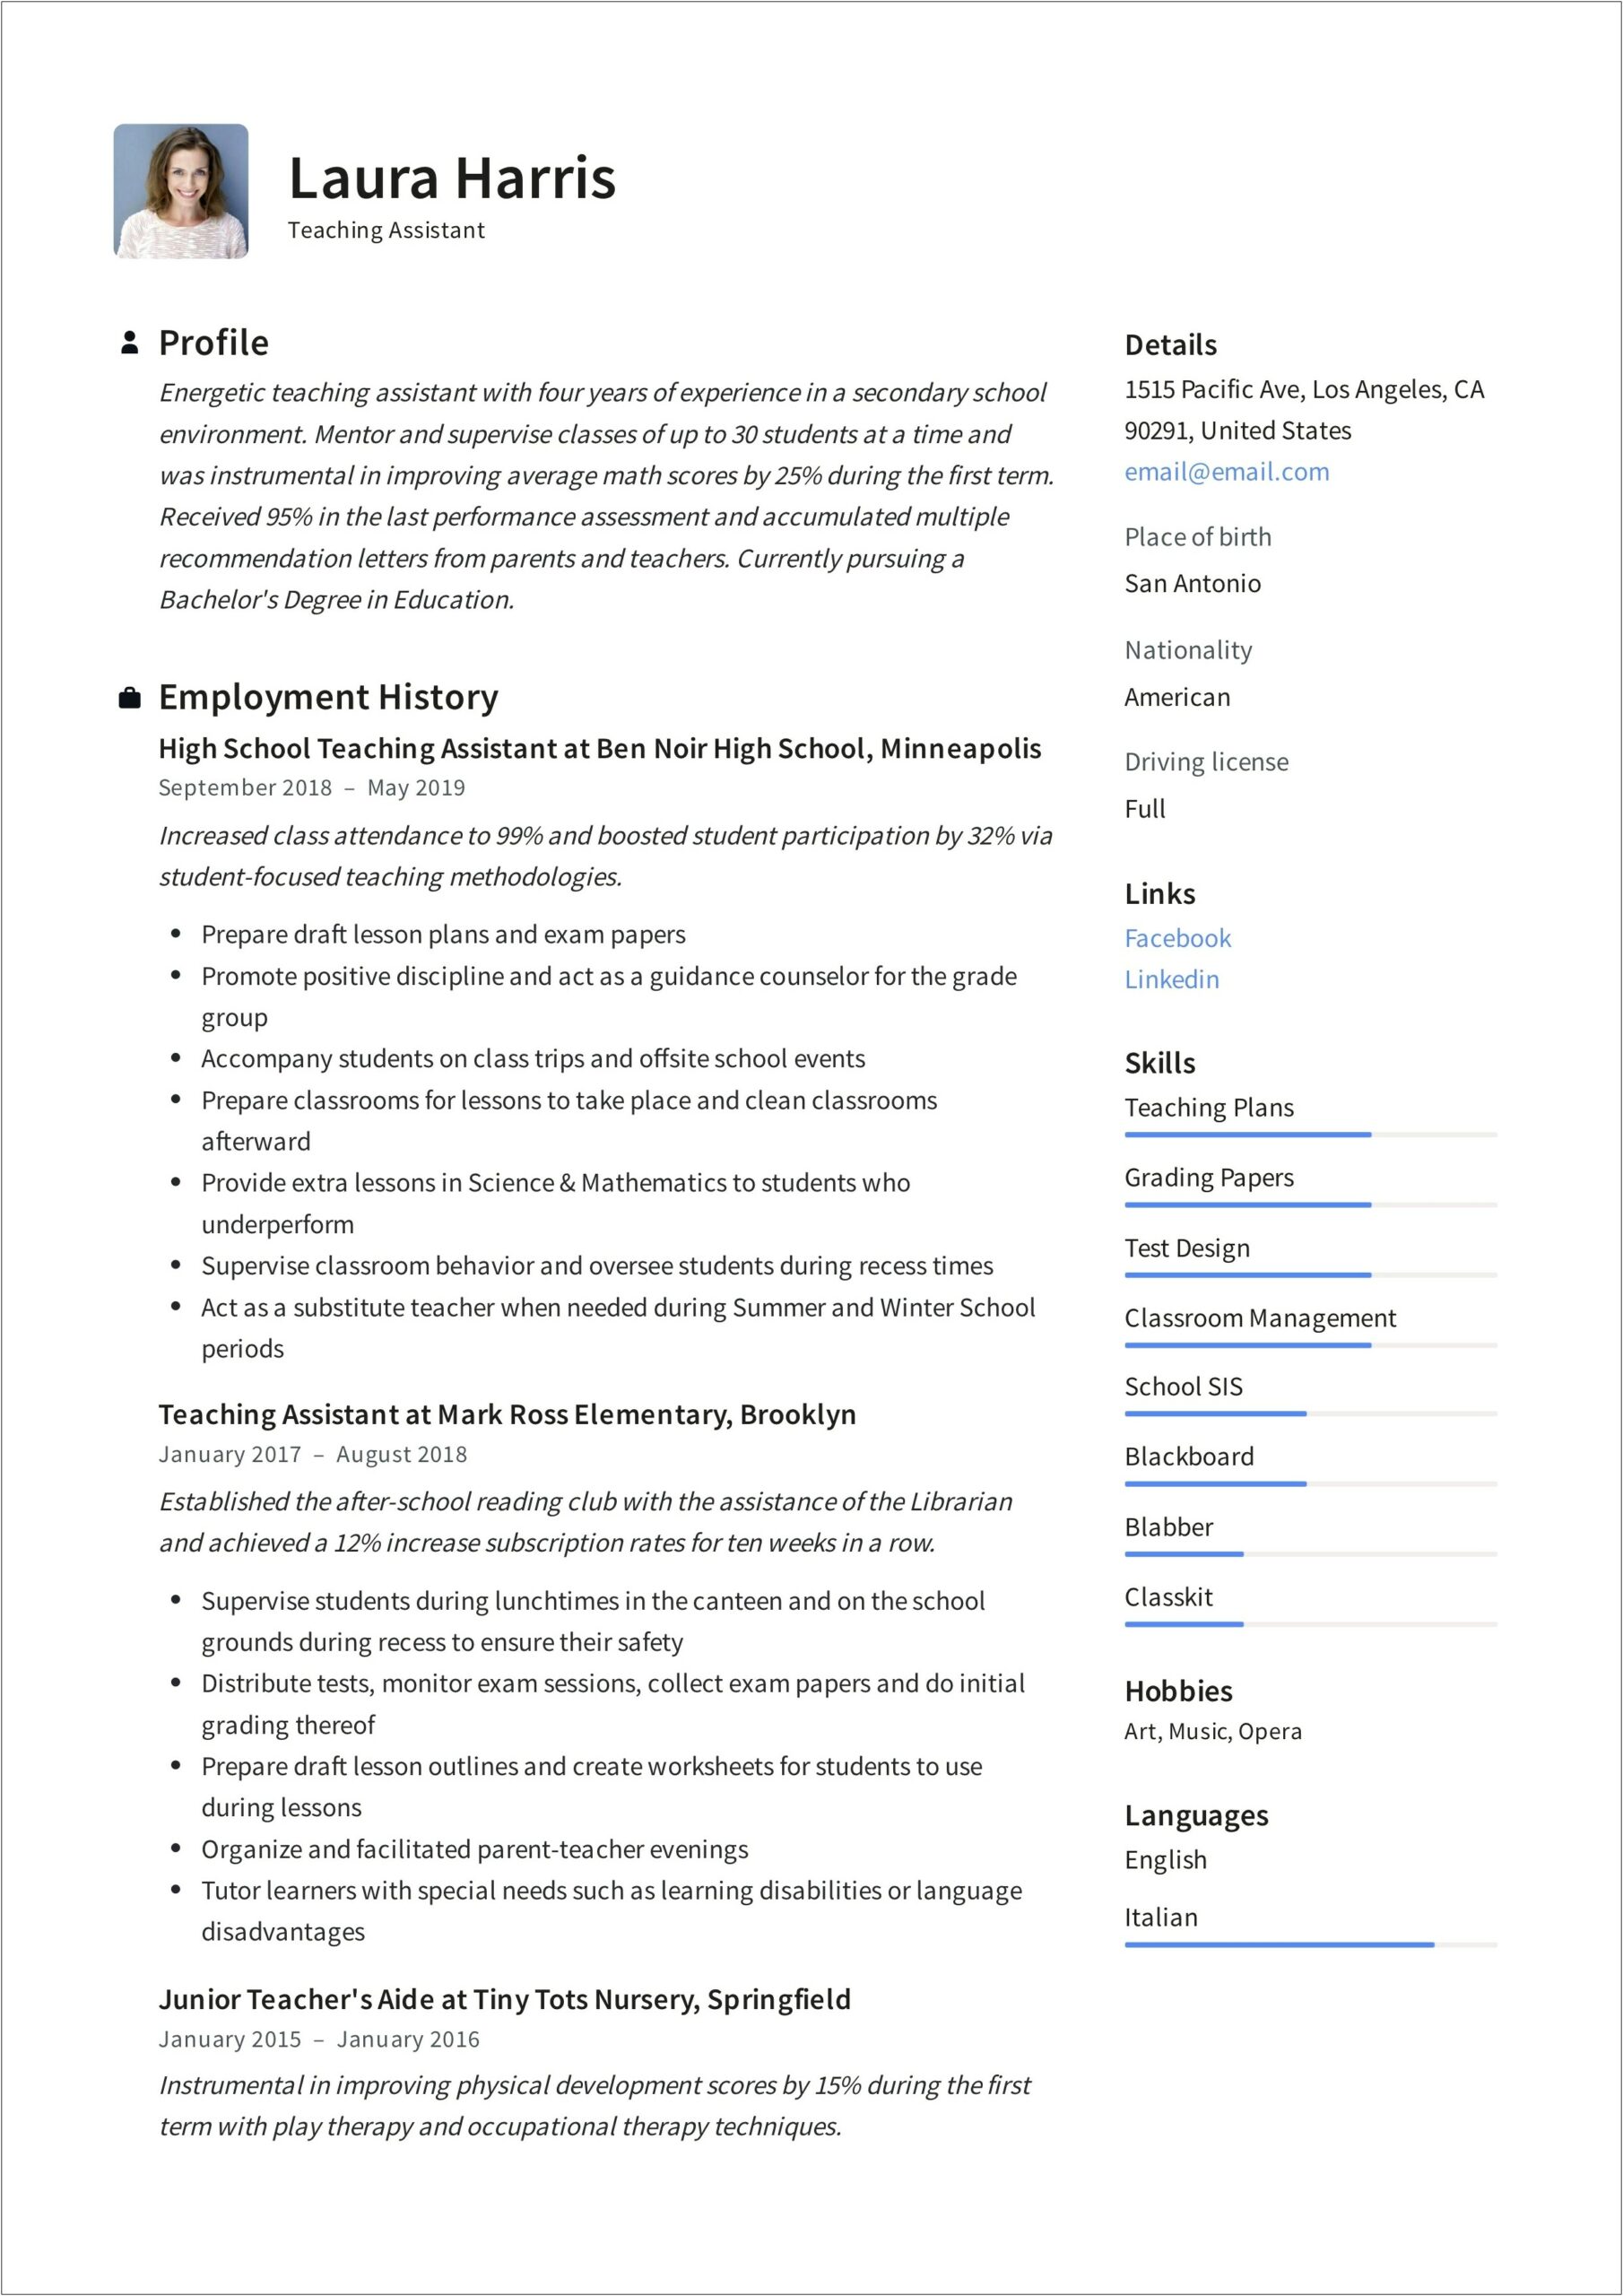 Connecticut Initial Educator Certificate On Resume Example